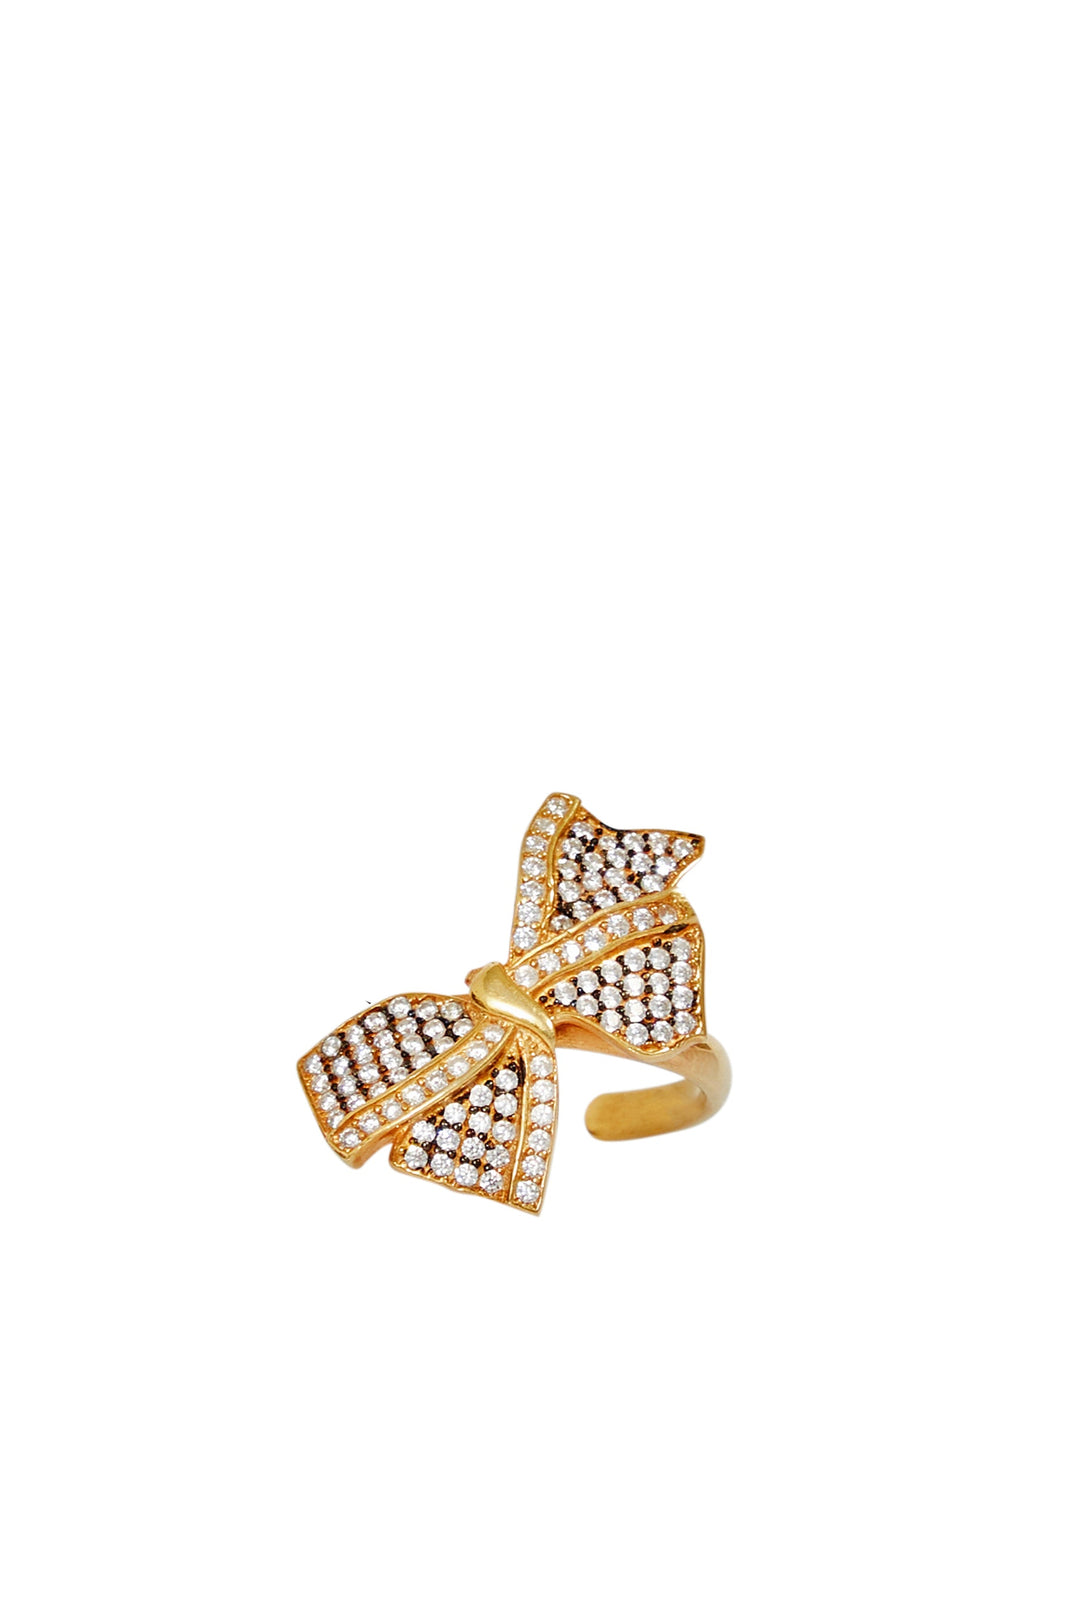 Madiso Lacey Ring - Gold